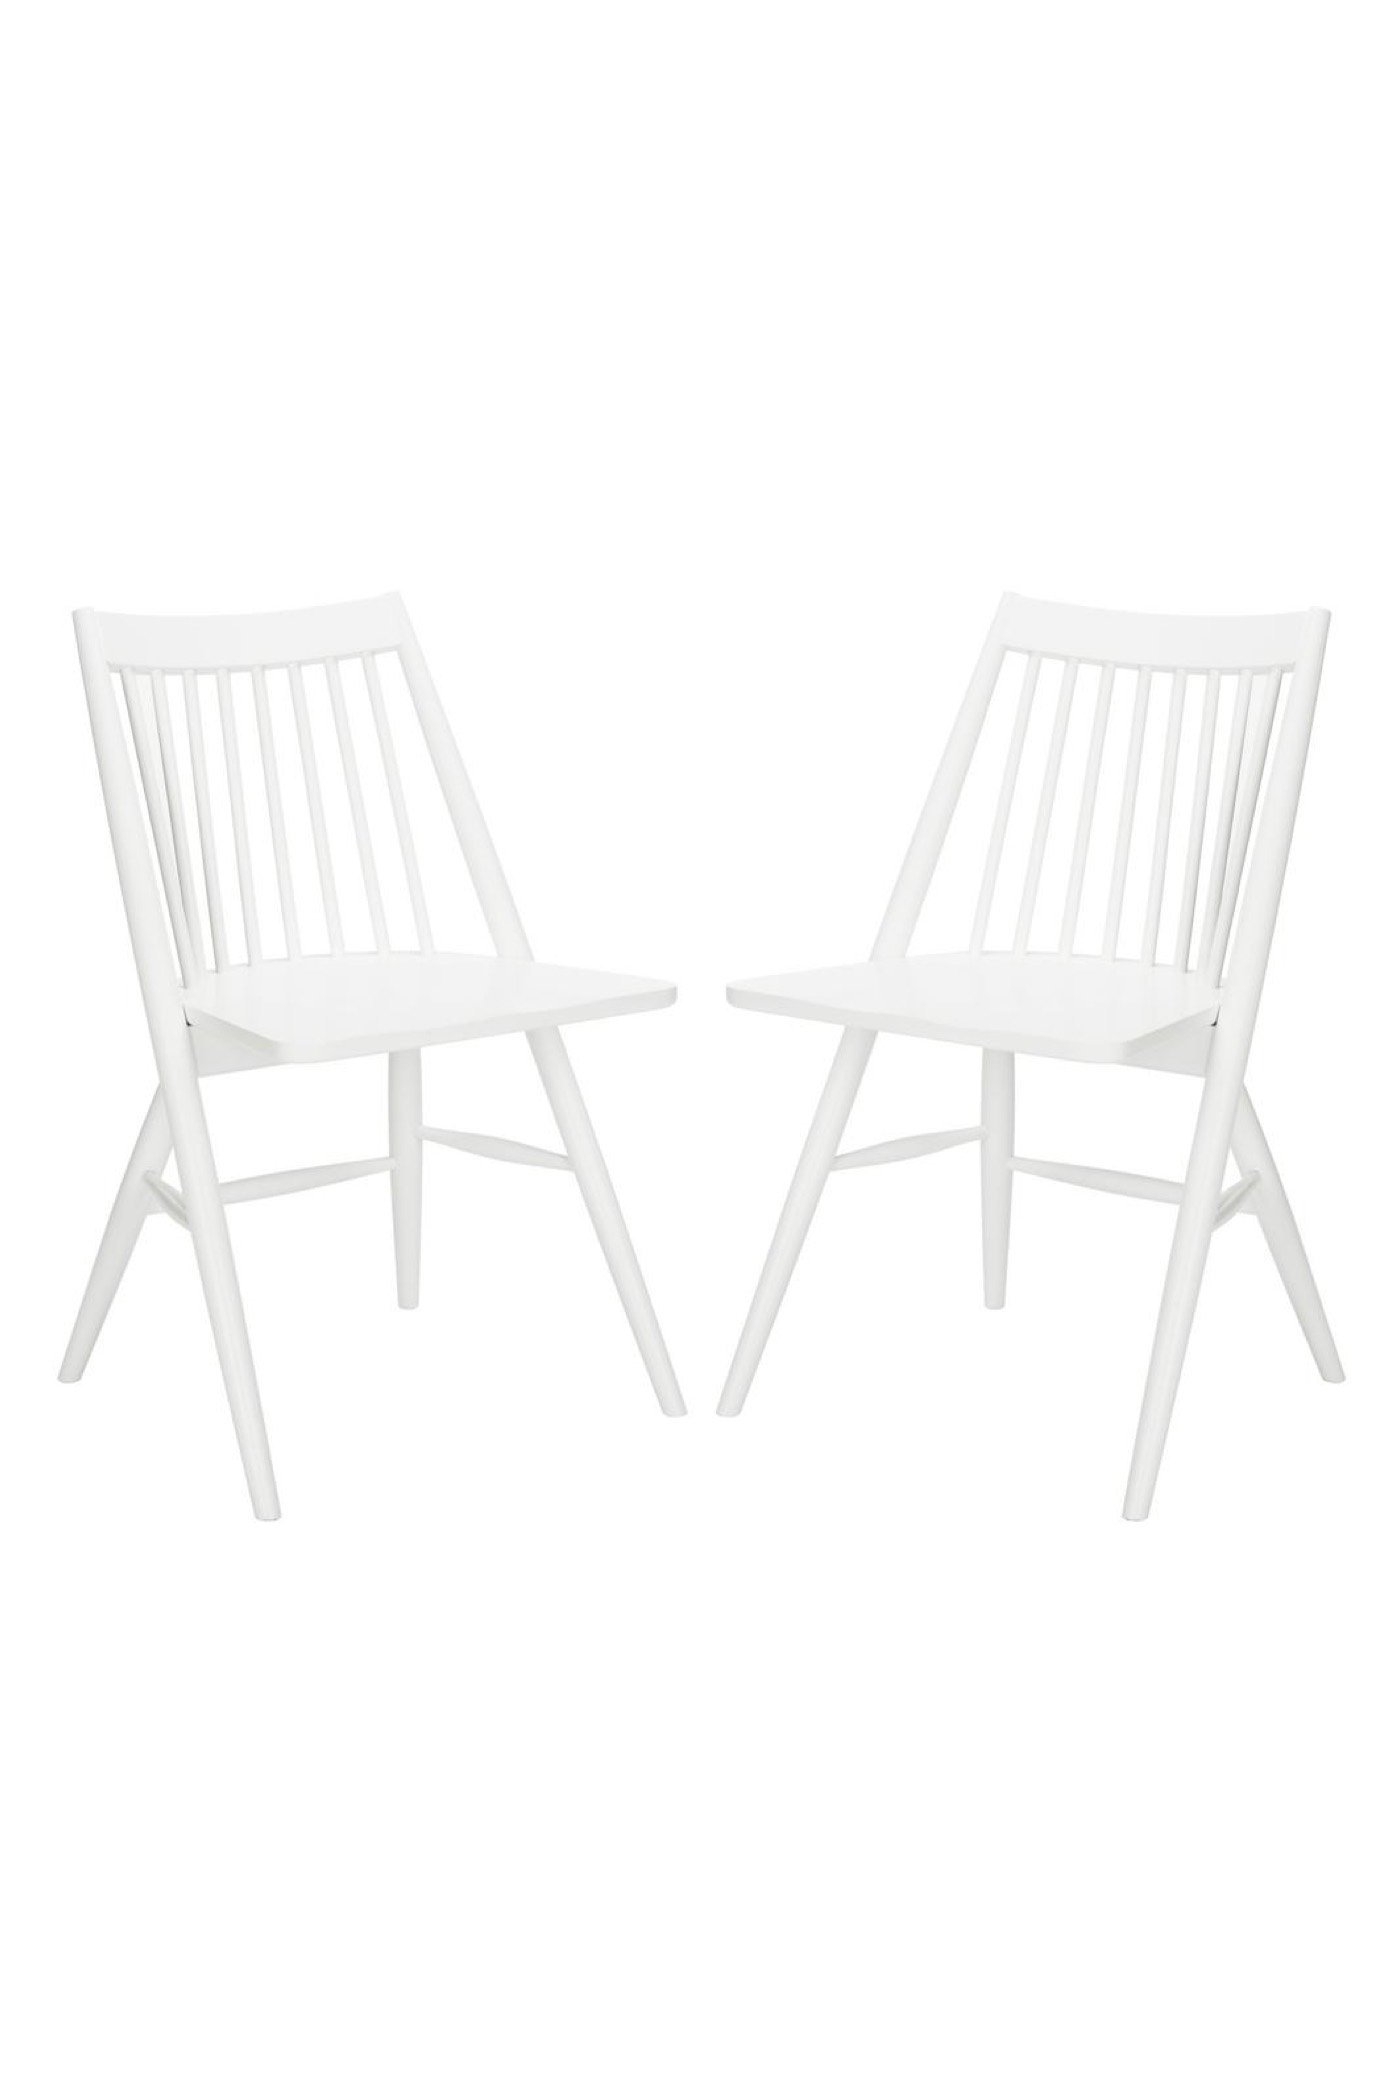 Ames Chairs, White, Set of 2 - Image 0